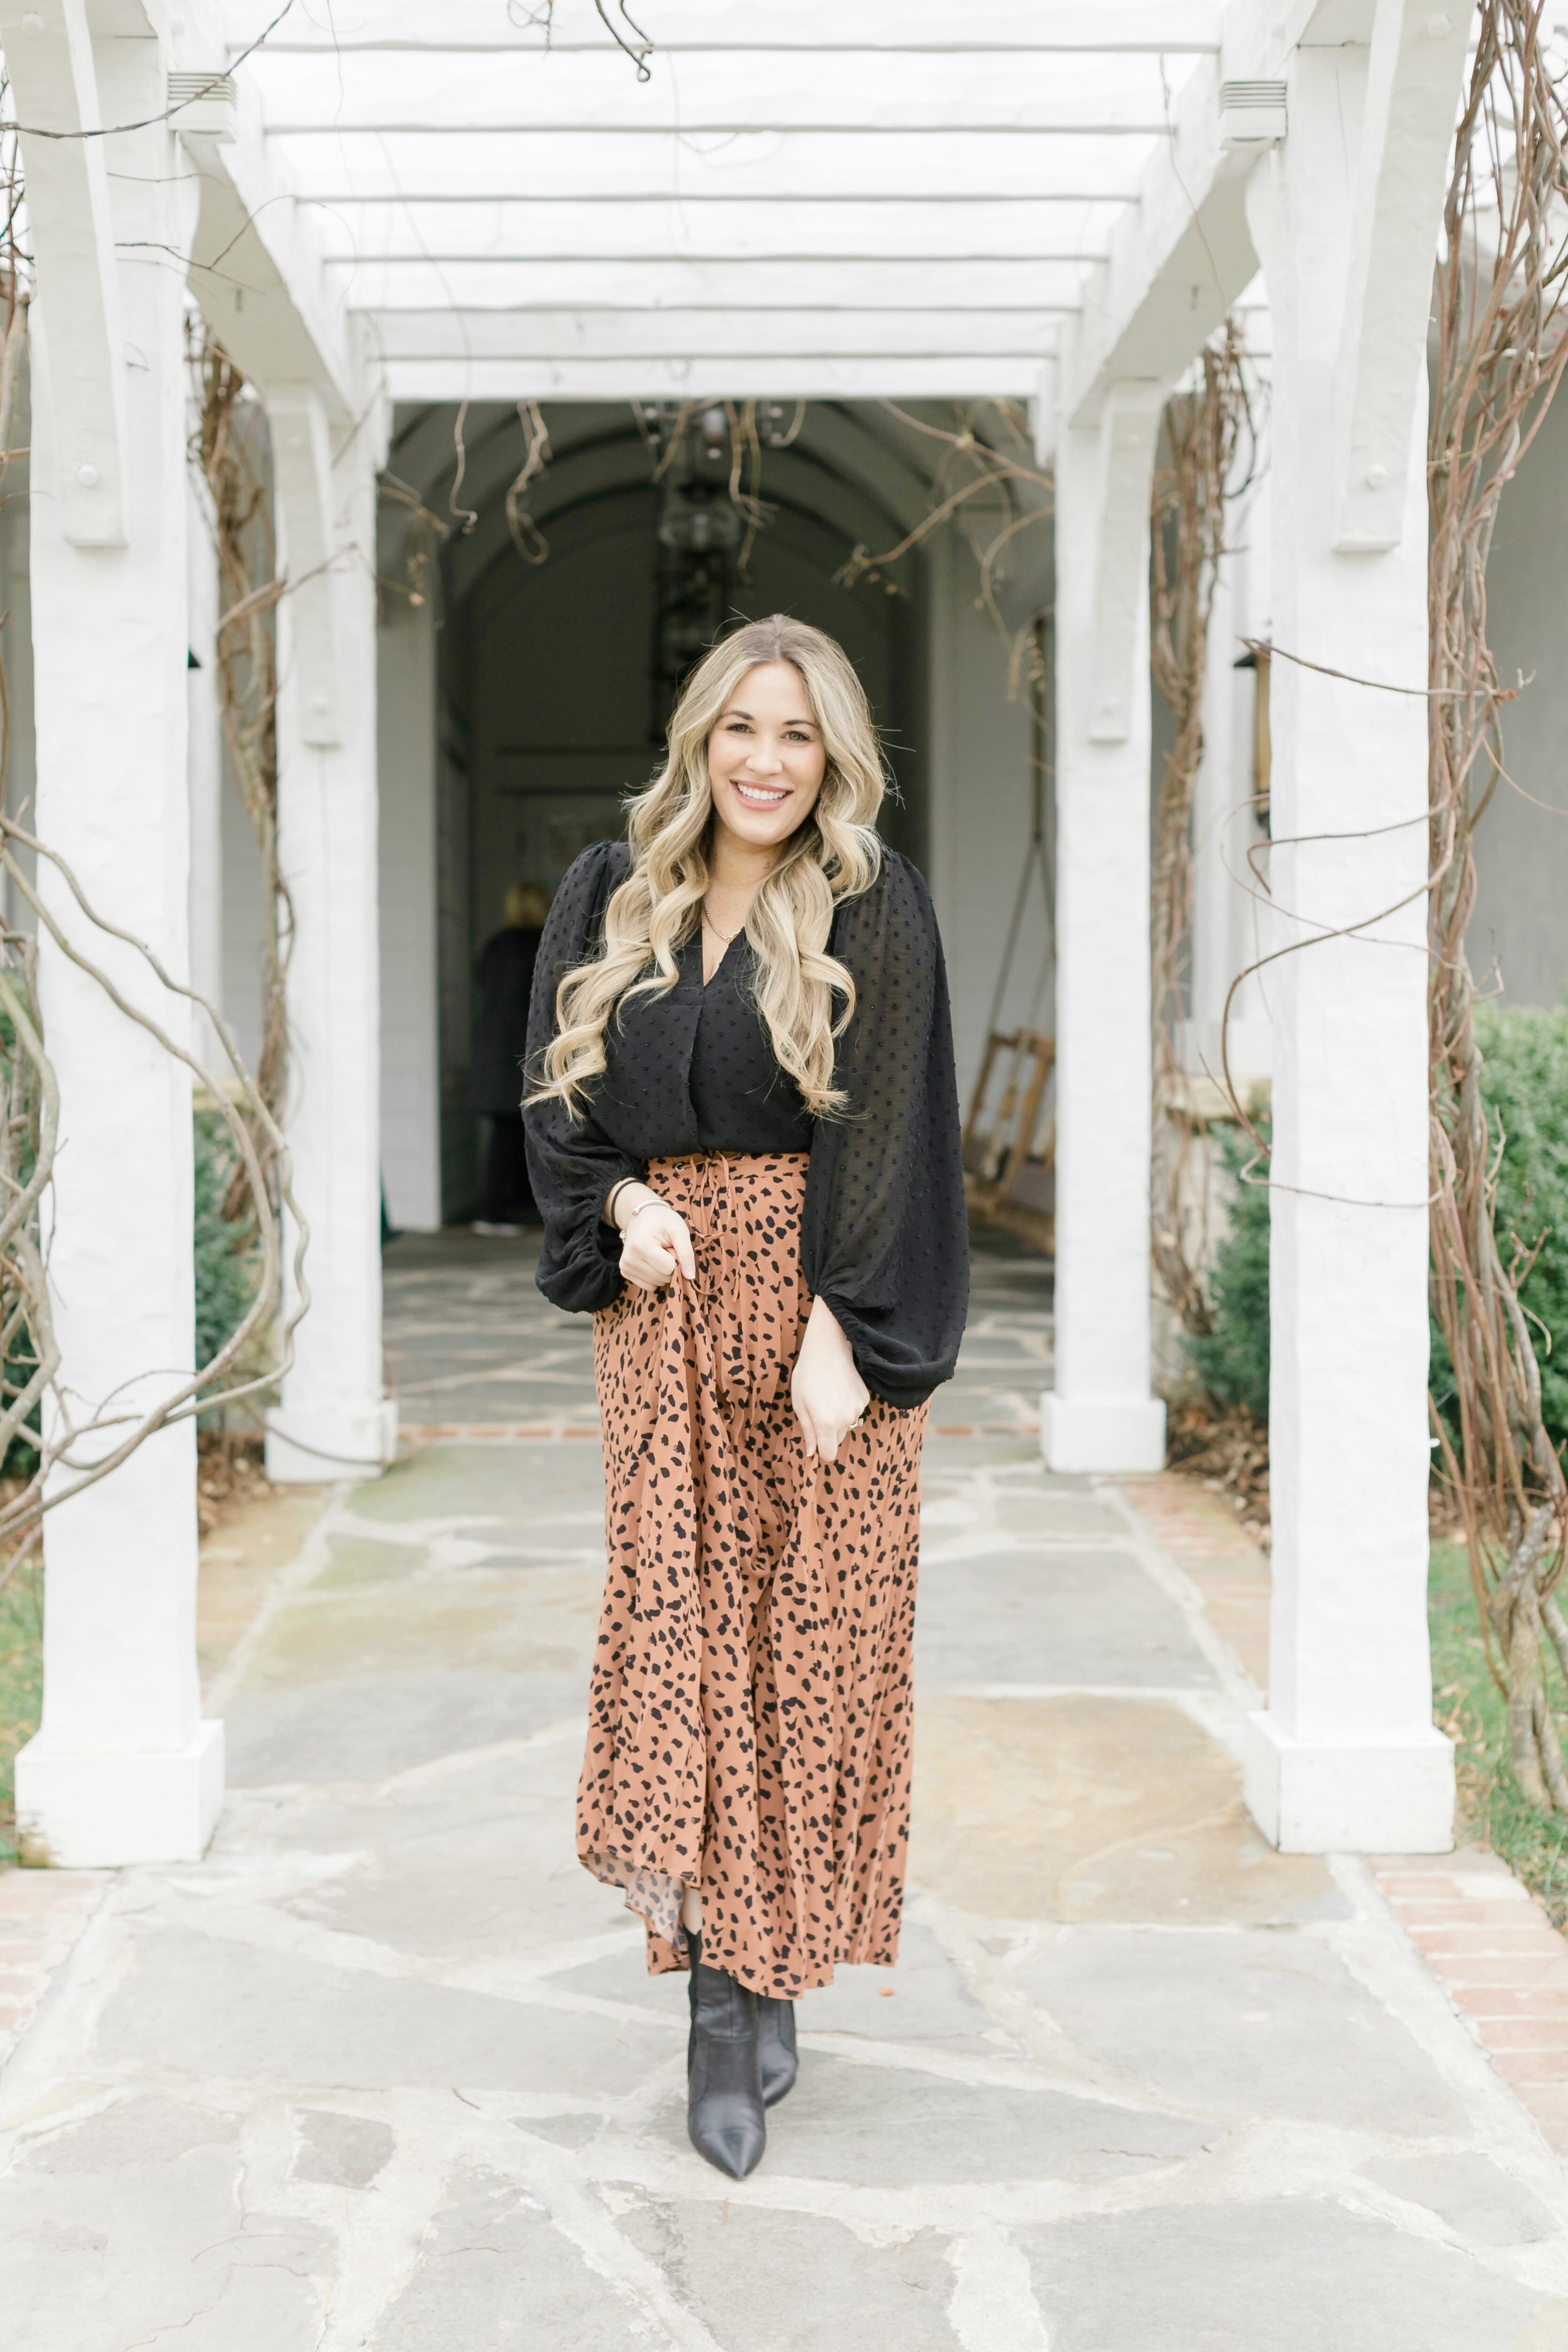 PinkBlush animal print maxi skirt styled by top Memphis fashion blogger, Walking in Memphis in High Heels.